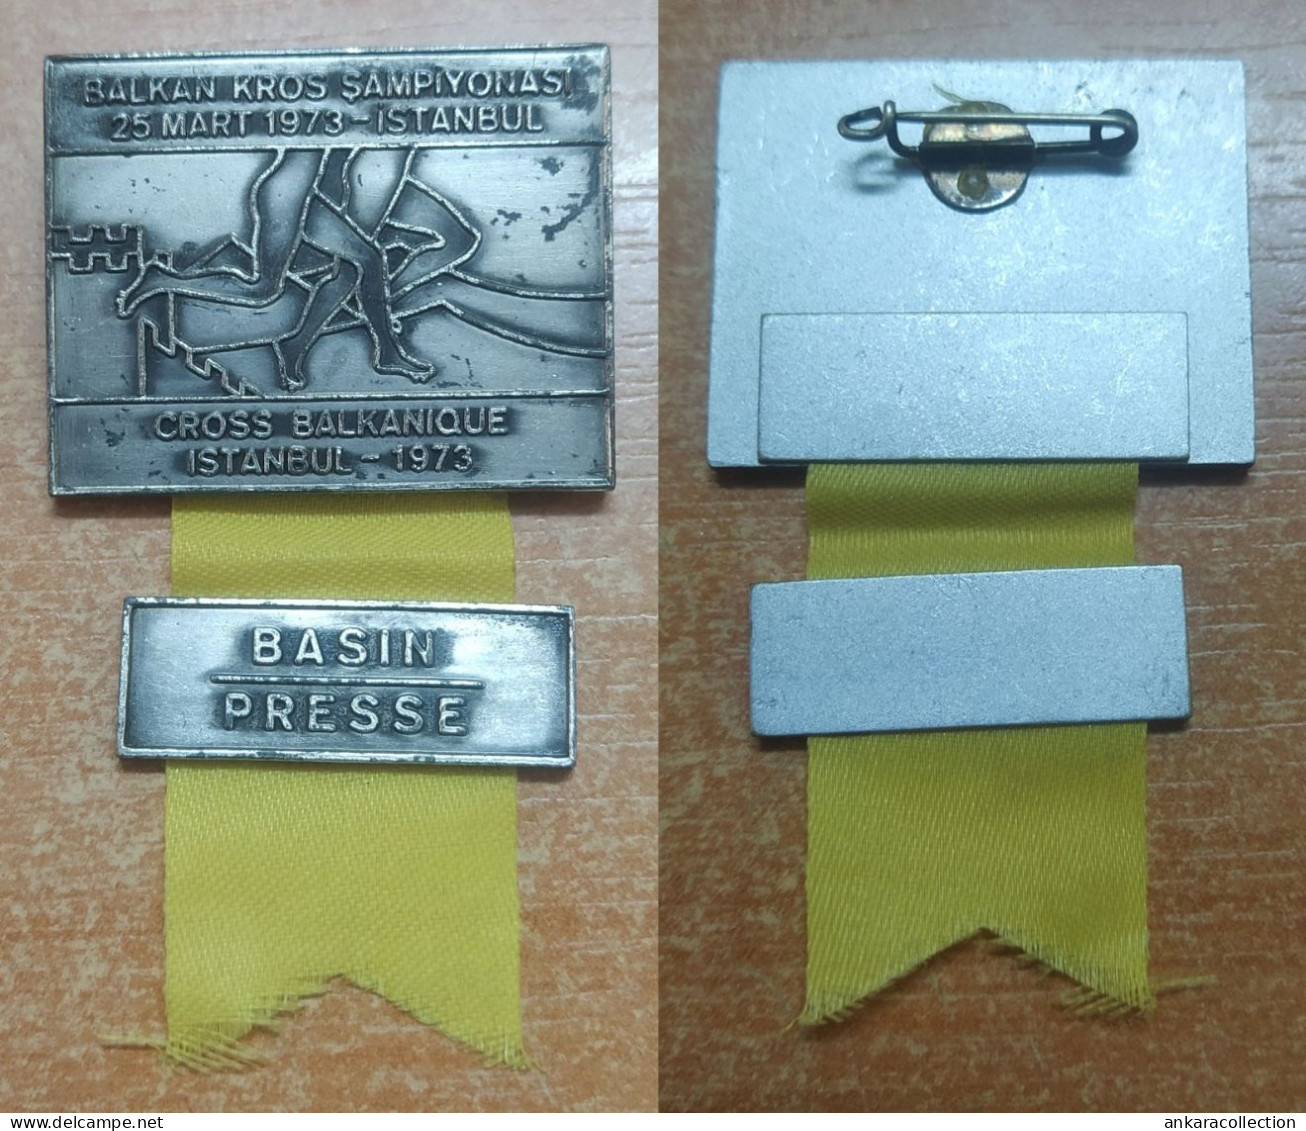 AC -  BALKAN CROSS COUNTRY CHAMPIONSHIPS 25 MARCH 1973 ISTANBUL PRESS BADGE PIN - Habillement, Souvenirs & Autres